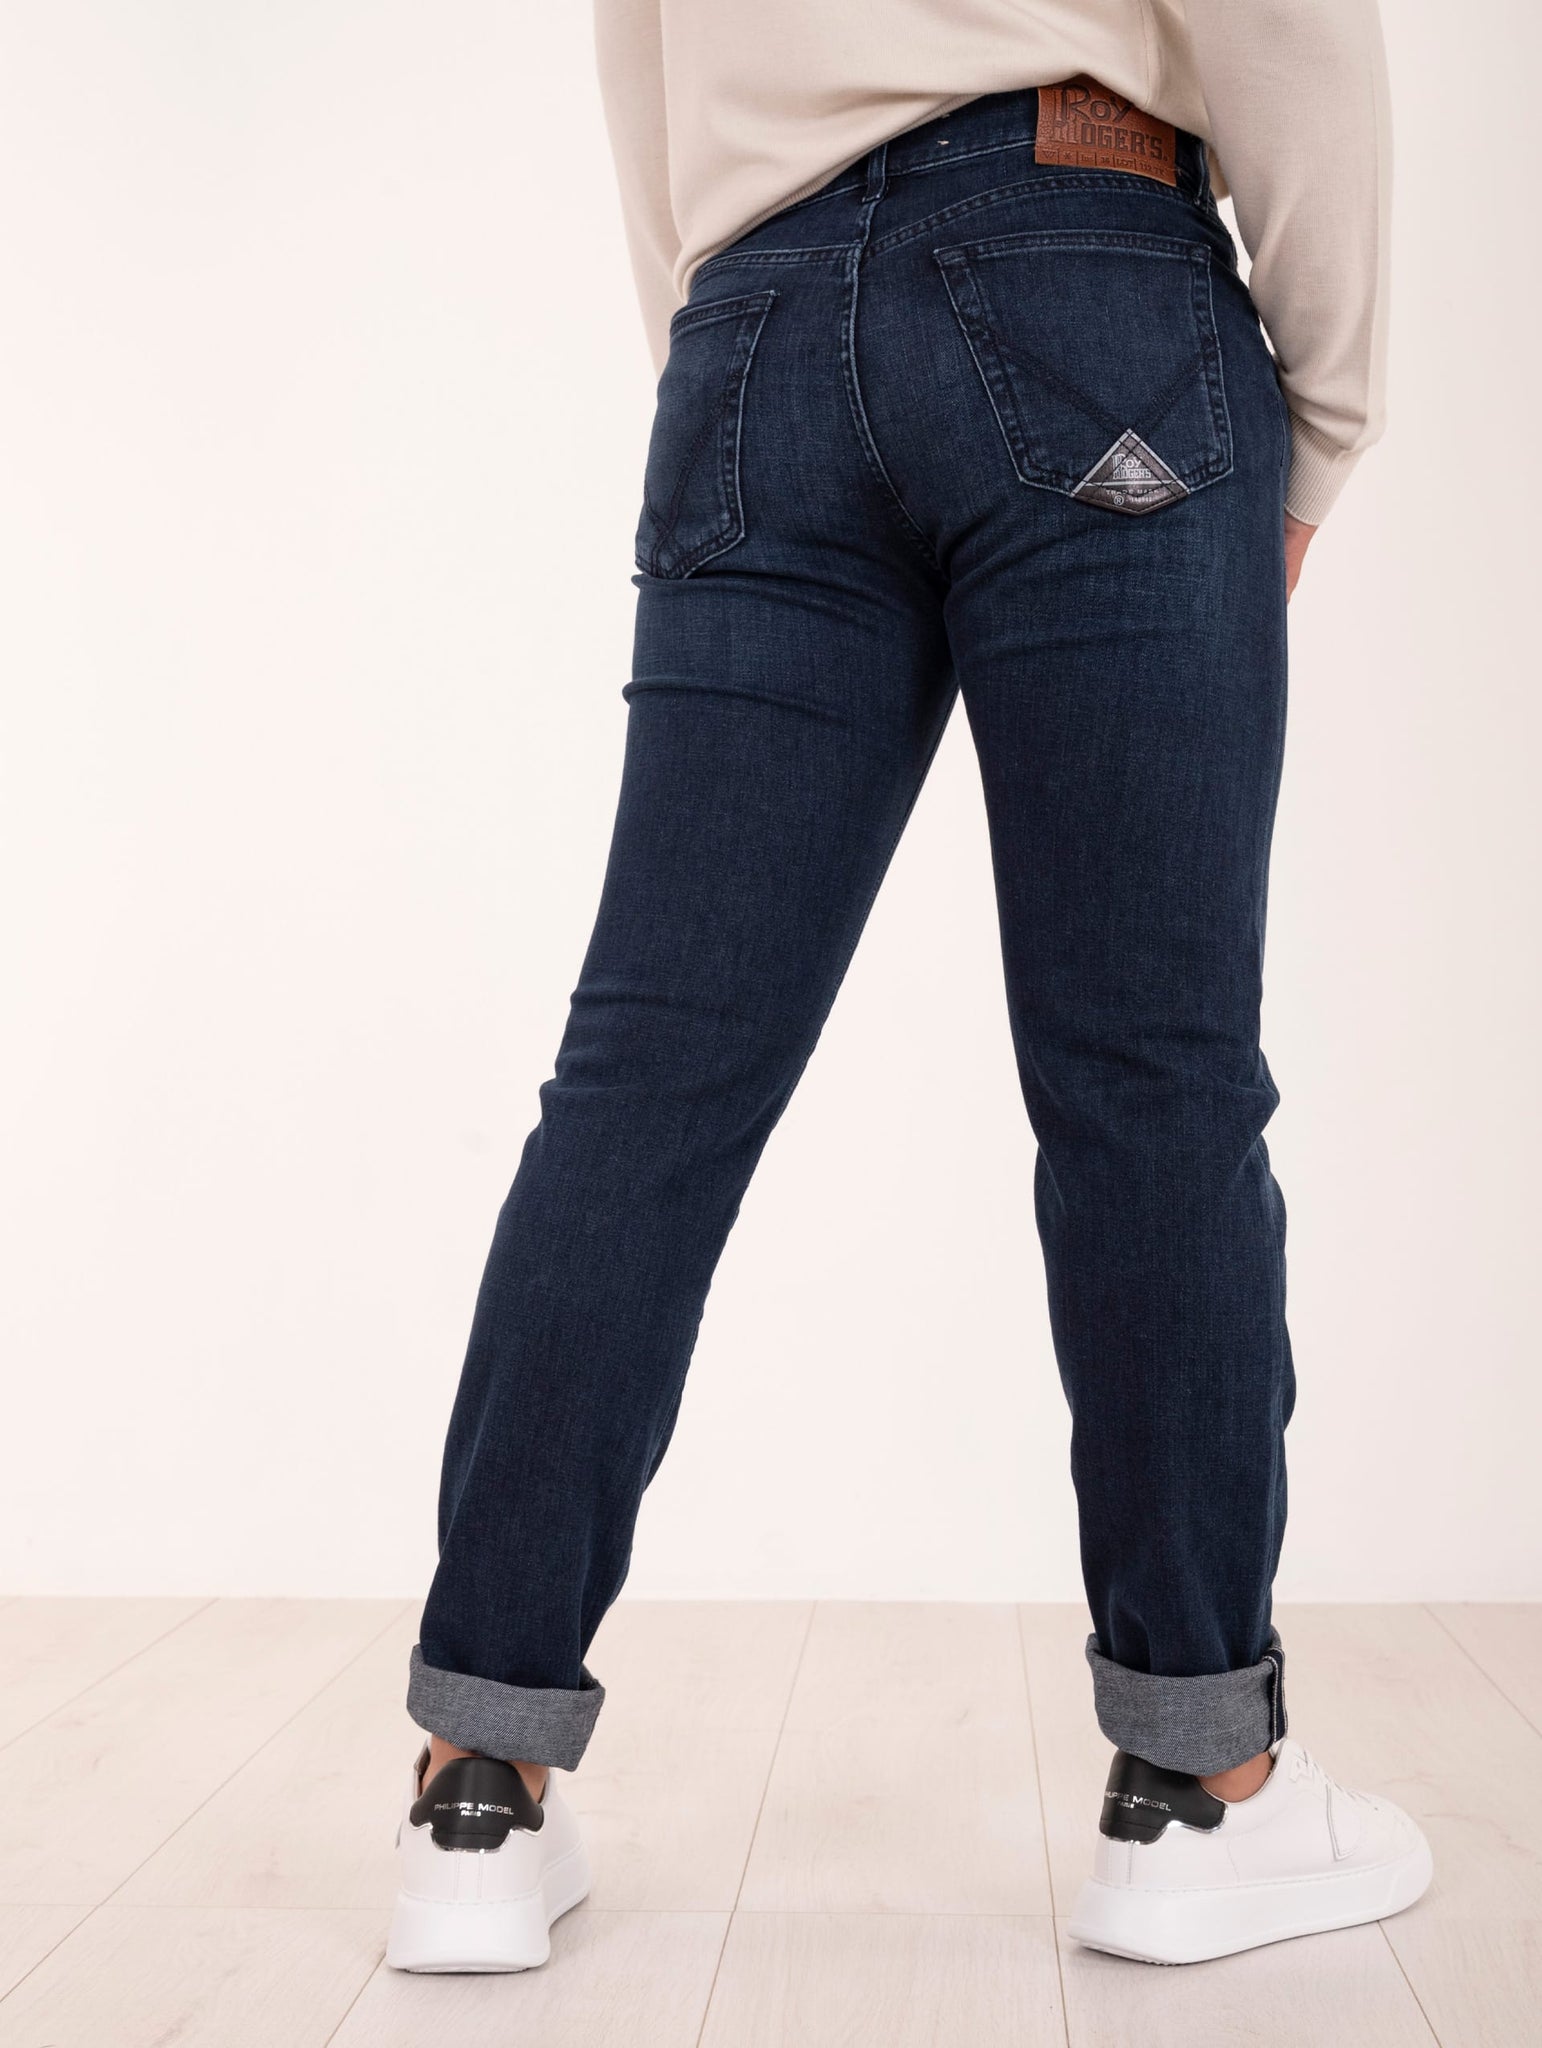 Jeans Roy Roger's Columbus in Cotone Stretch Denim Scuro